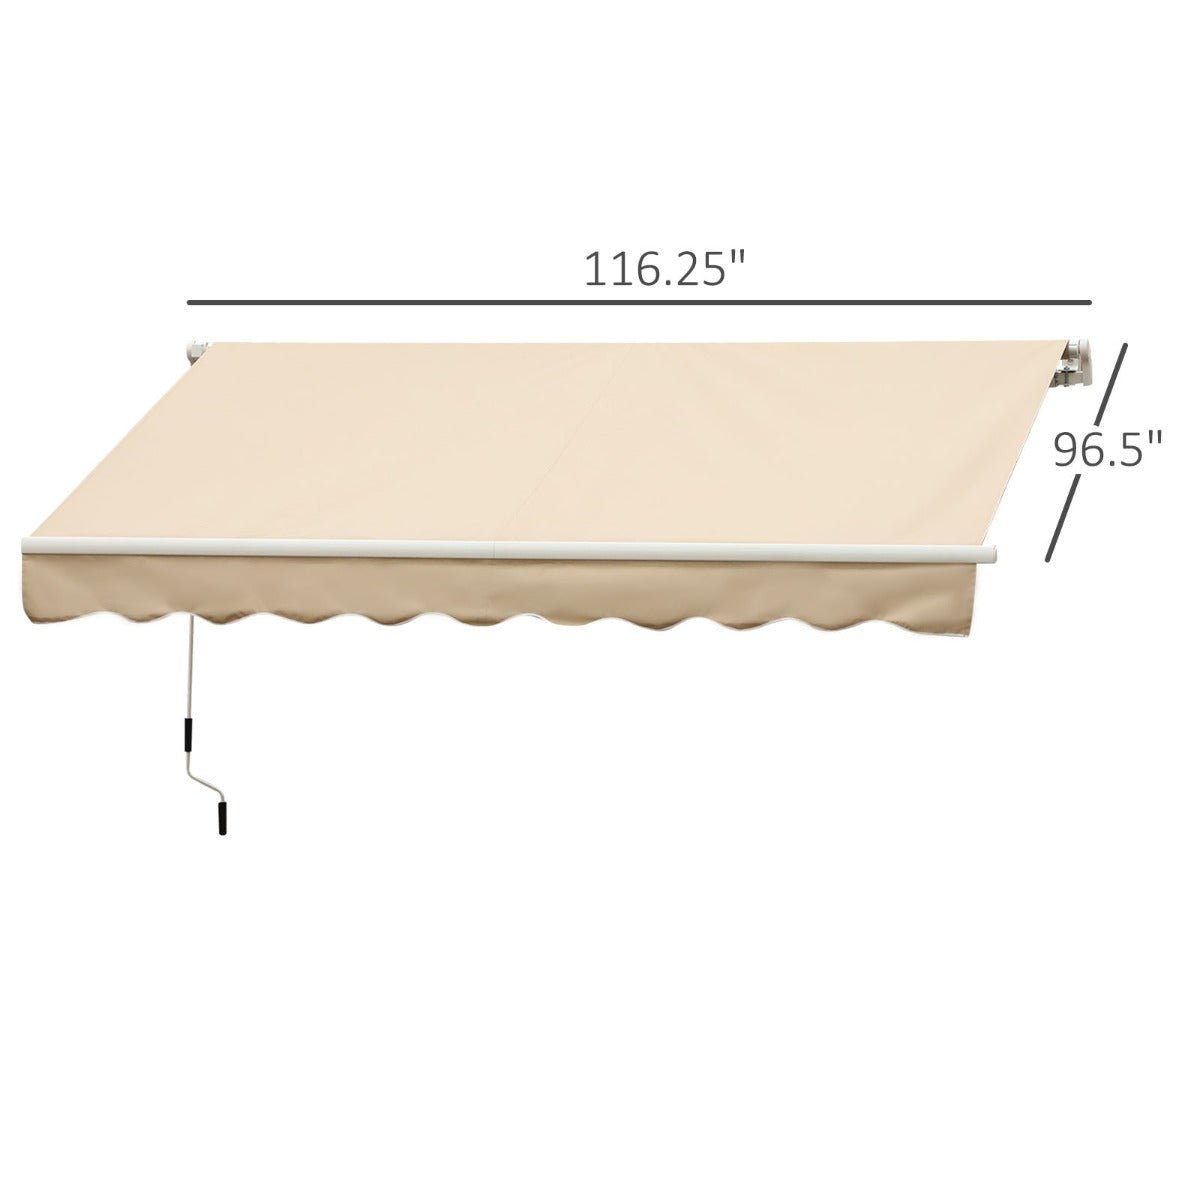 Outdoor and Garden-10' x 8' Manual Retractable Awning Sun Shade Shelter for Patio Deck Yard with UV Protection and Easy Crank Opening, Beige - Outdoor Style Company